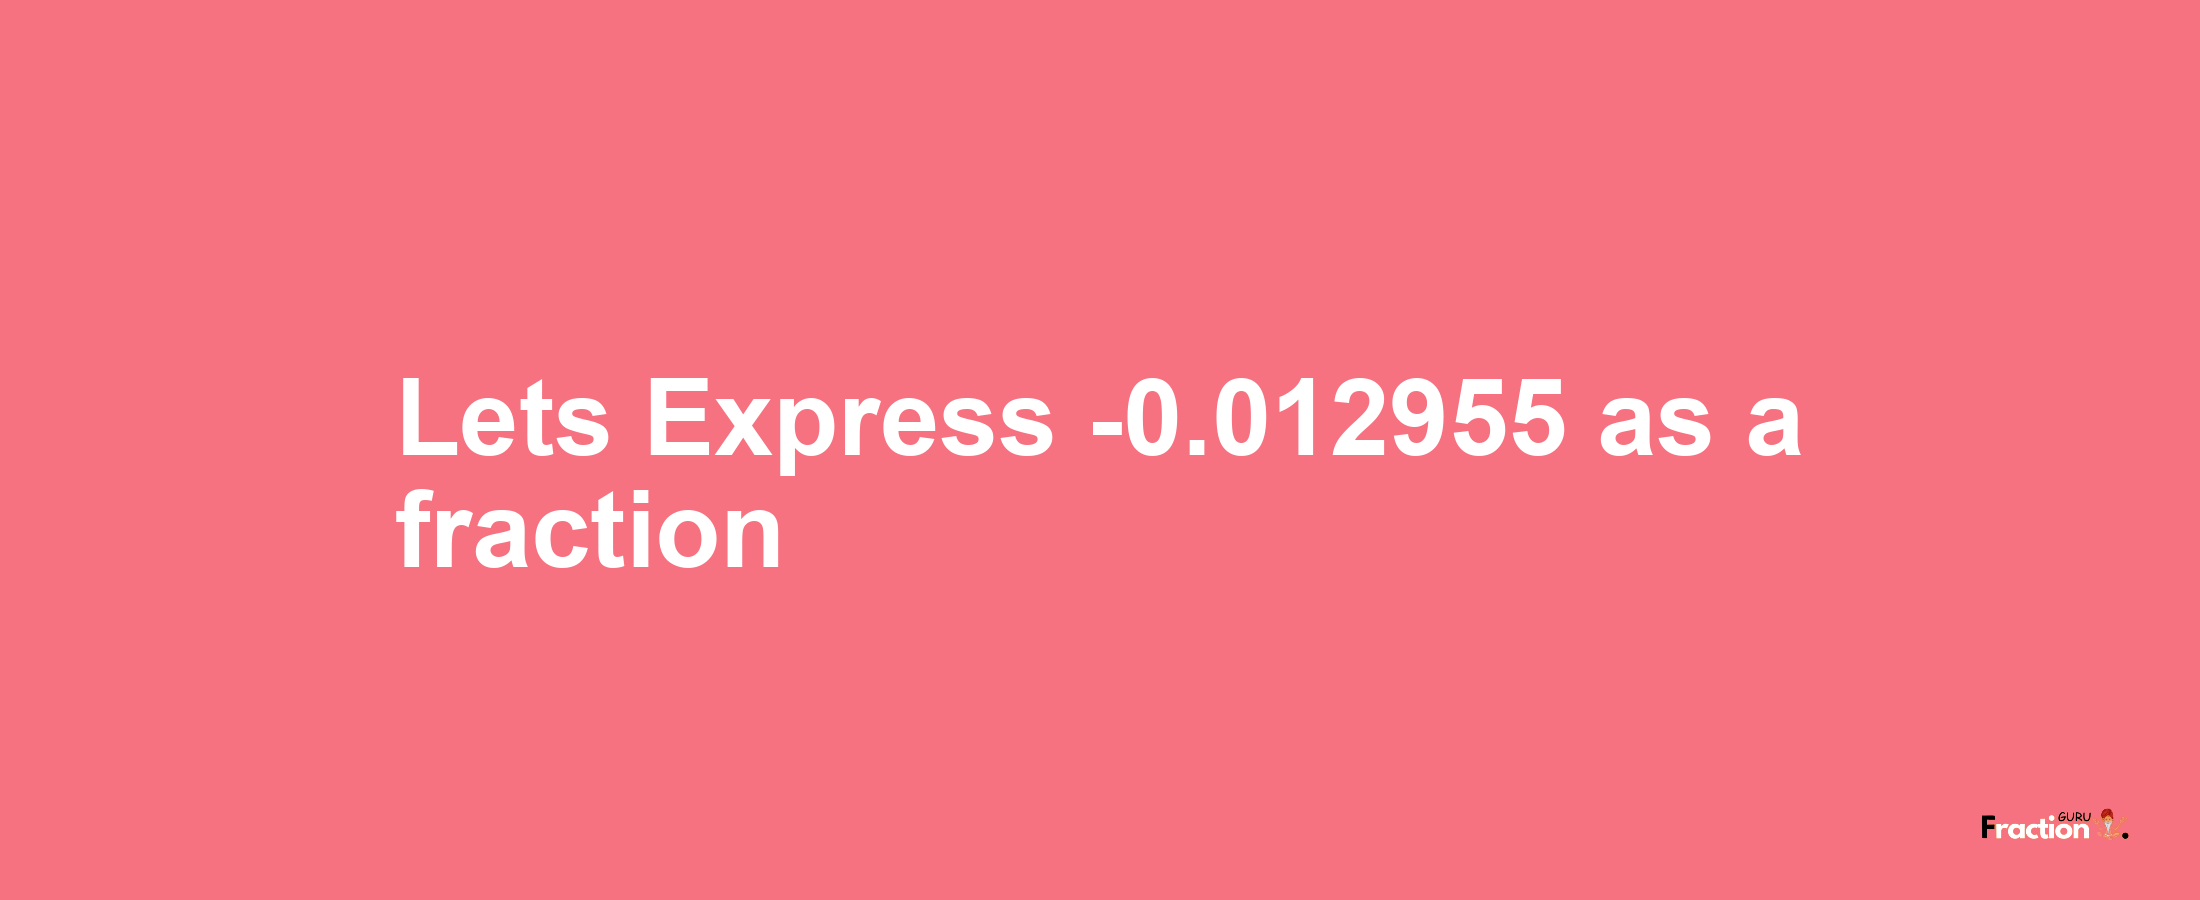 Lets Express -0.012955 as afraction